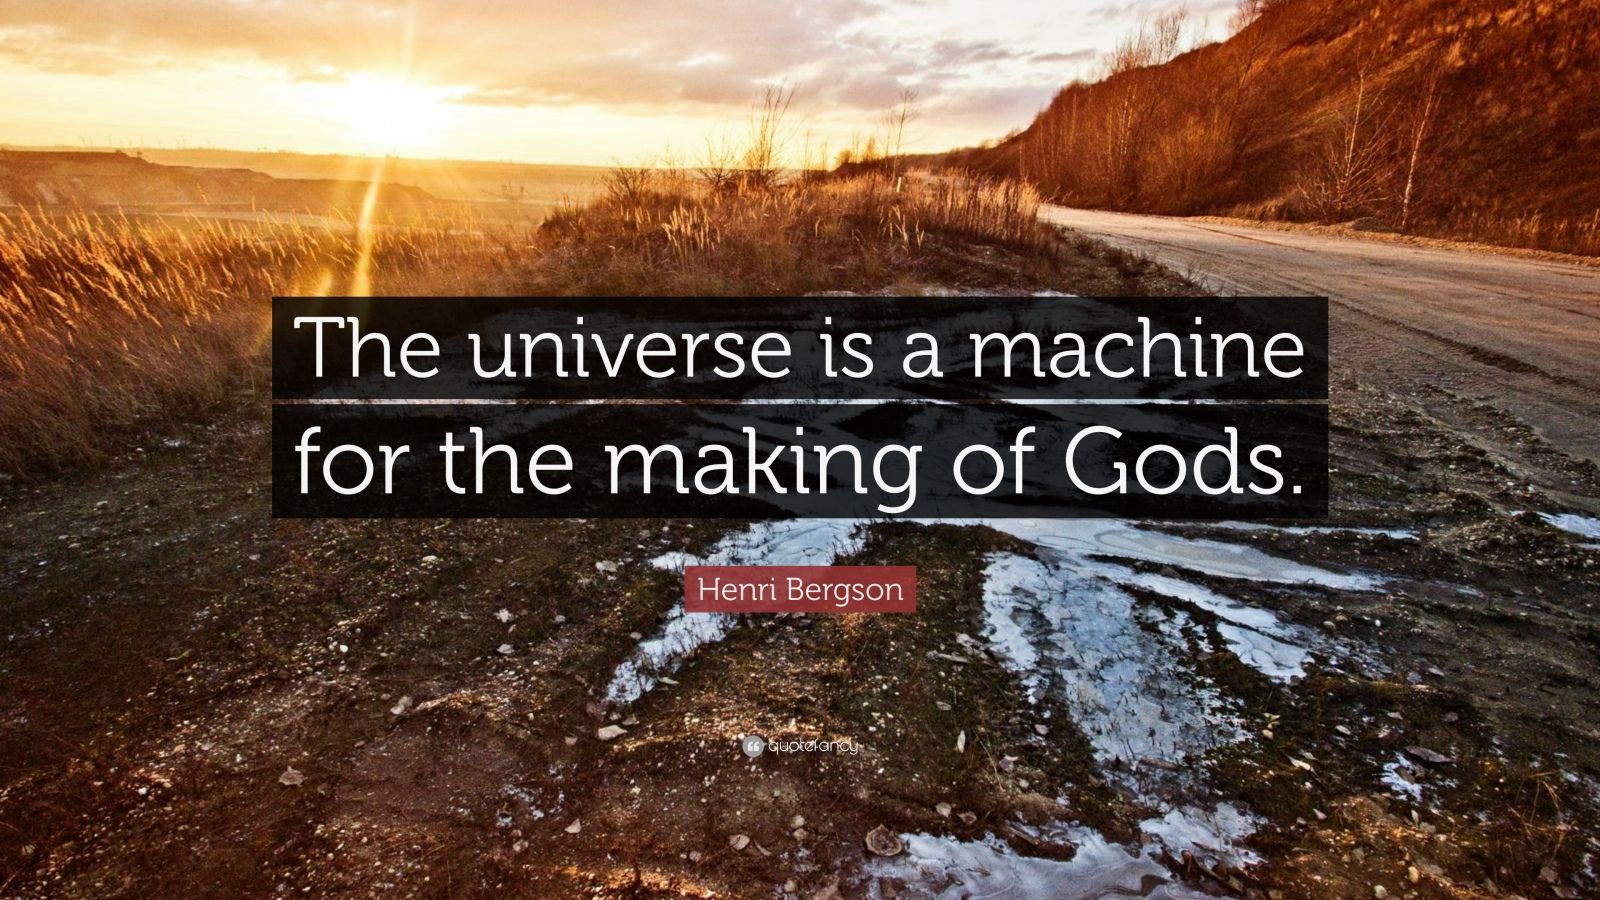 850344-Henri-Bergson-Quote-The-universe-is-a-machine-for-the-making-of.jpg